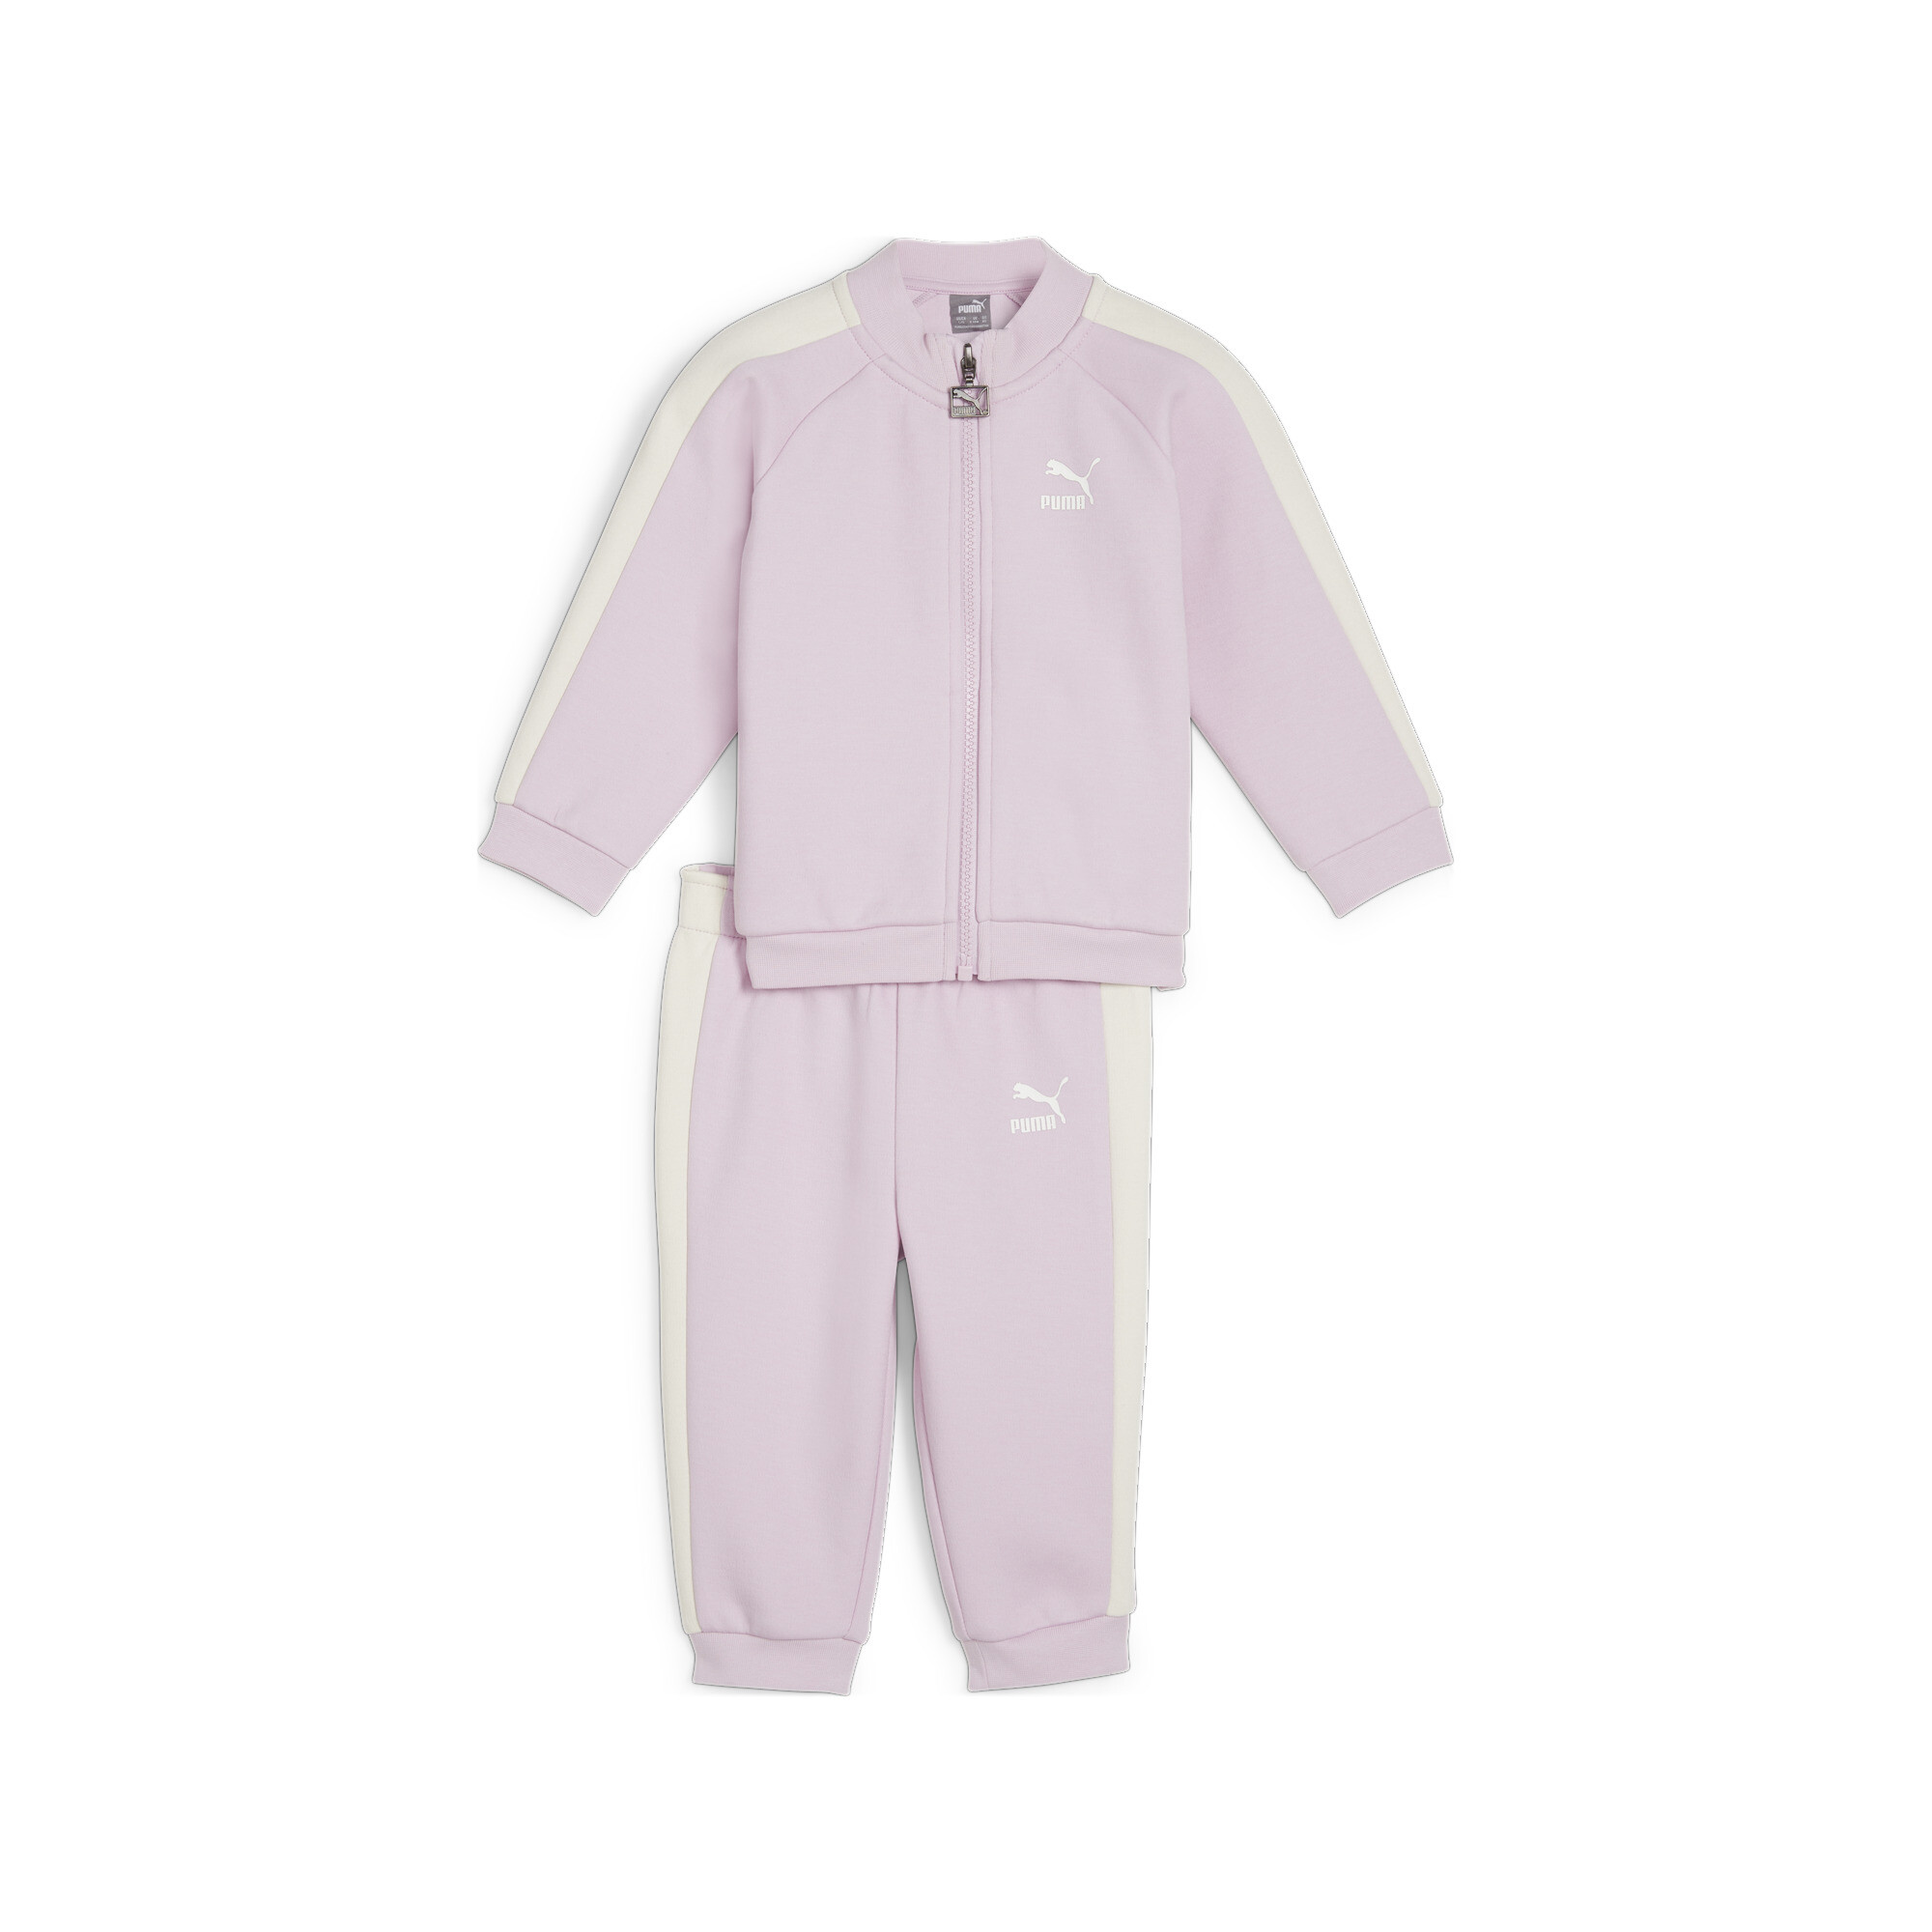 PUMA MINICATS T7 ICONIC Baby Tracksuit Set In 90 - Purple, Size 3-4 Youth